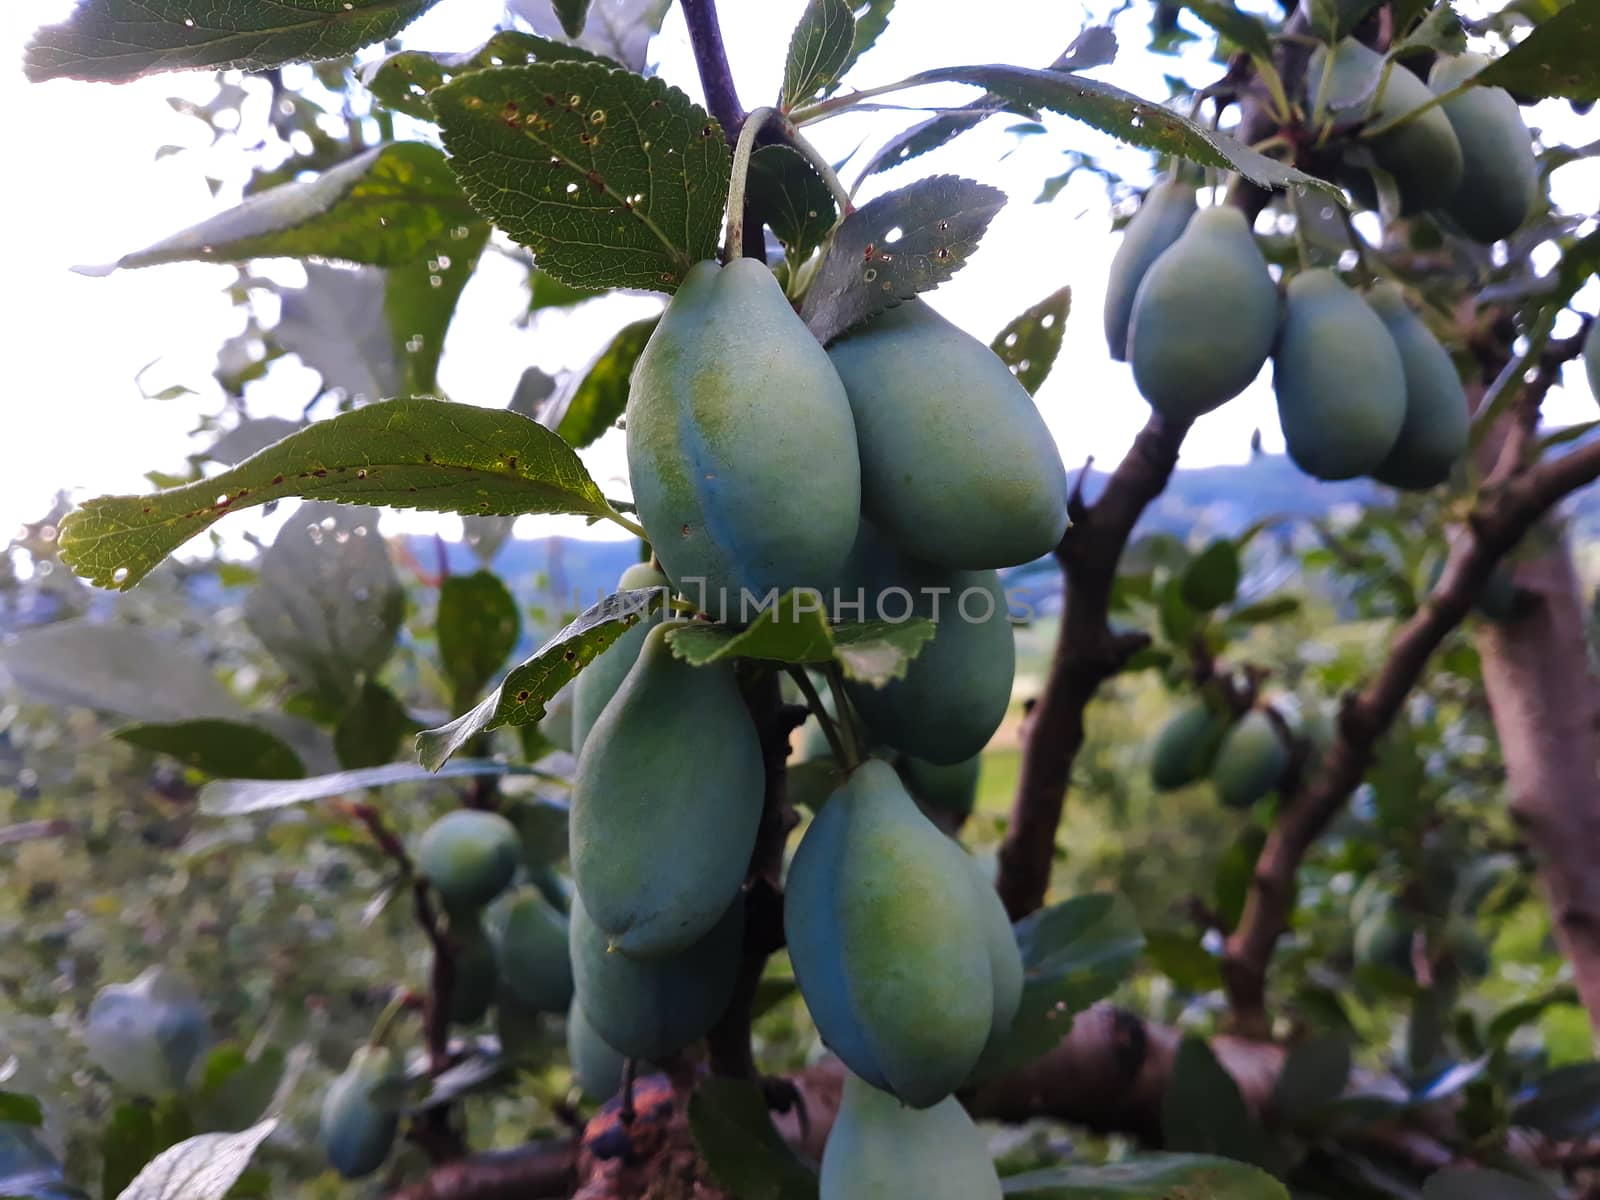 Plum fruit. Green plums on a branch, in a plum orchard. Zavidovici, Bosnia and Herzegovina.